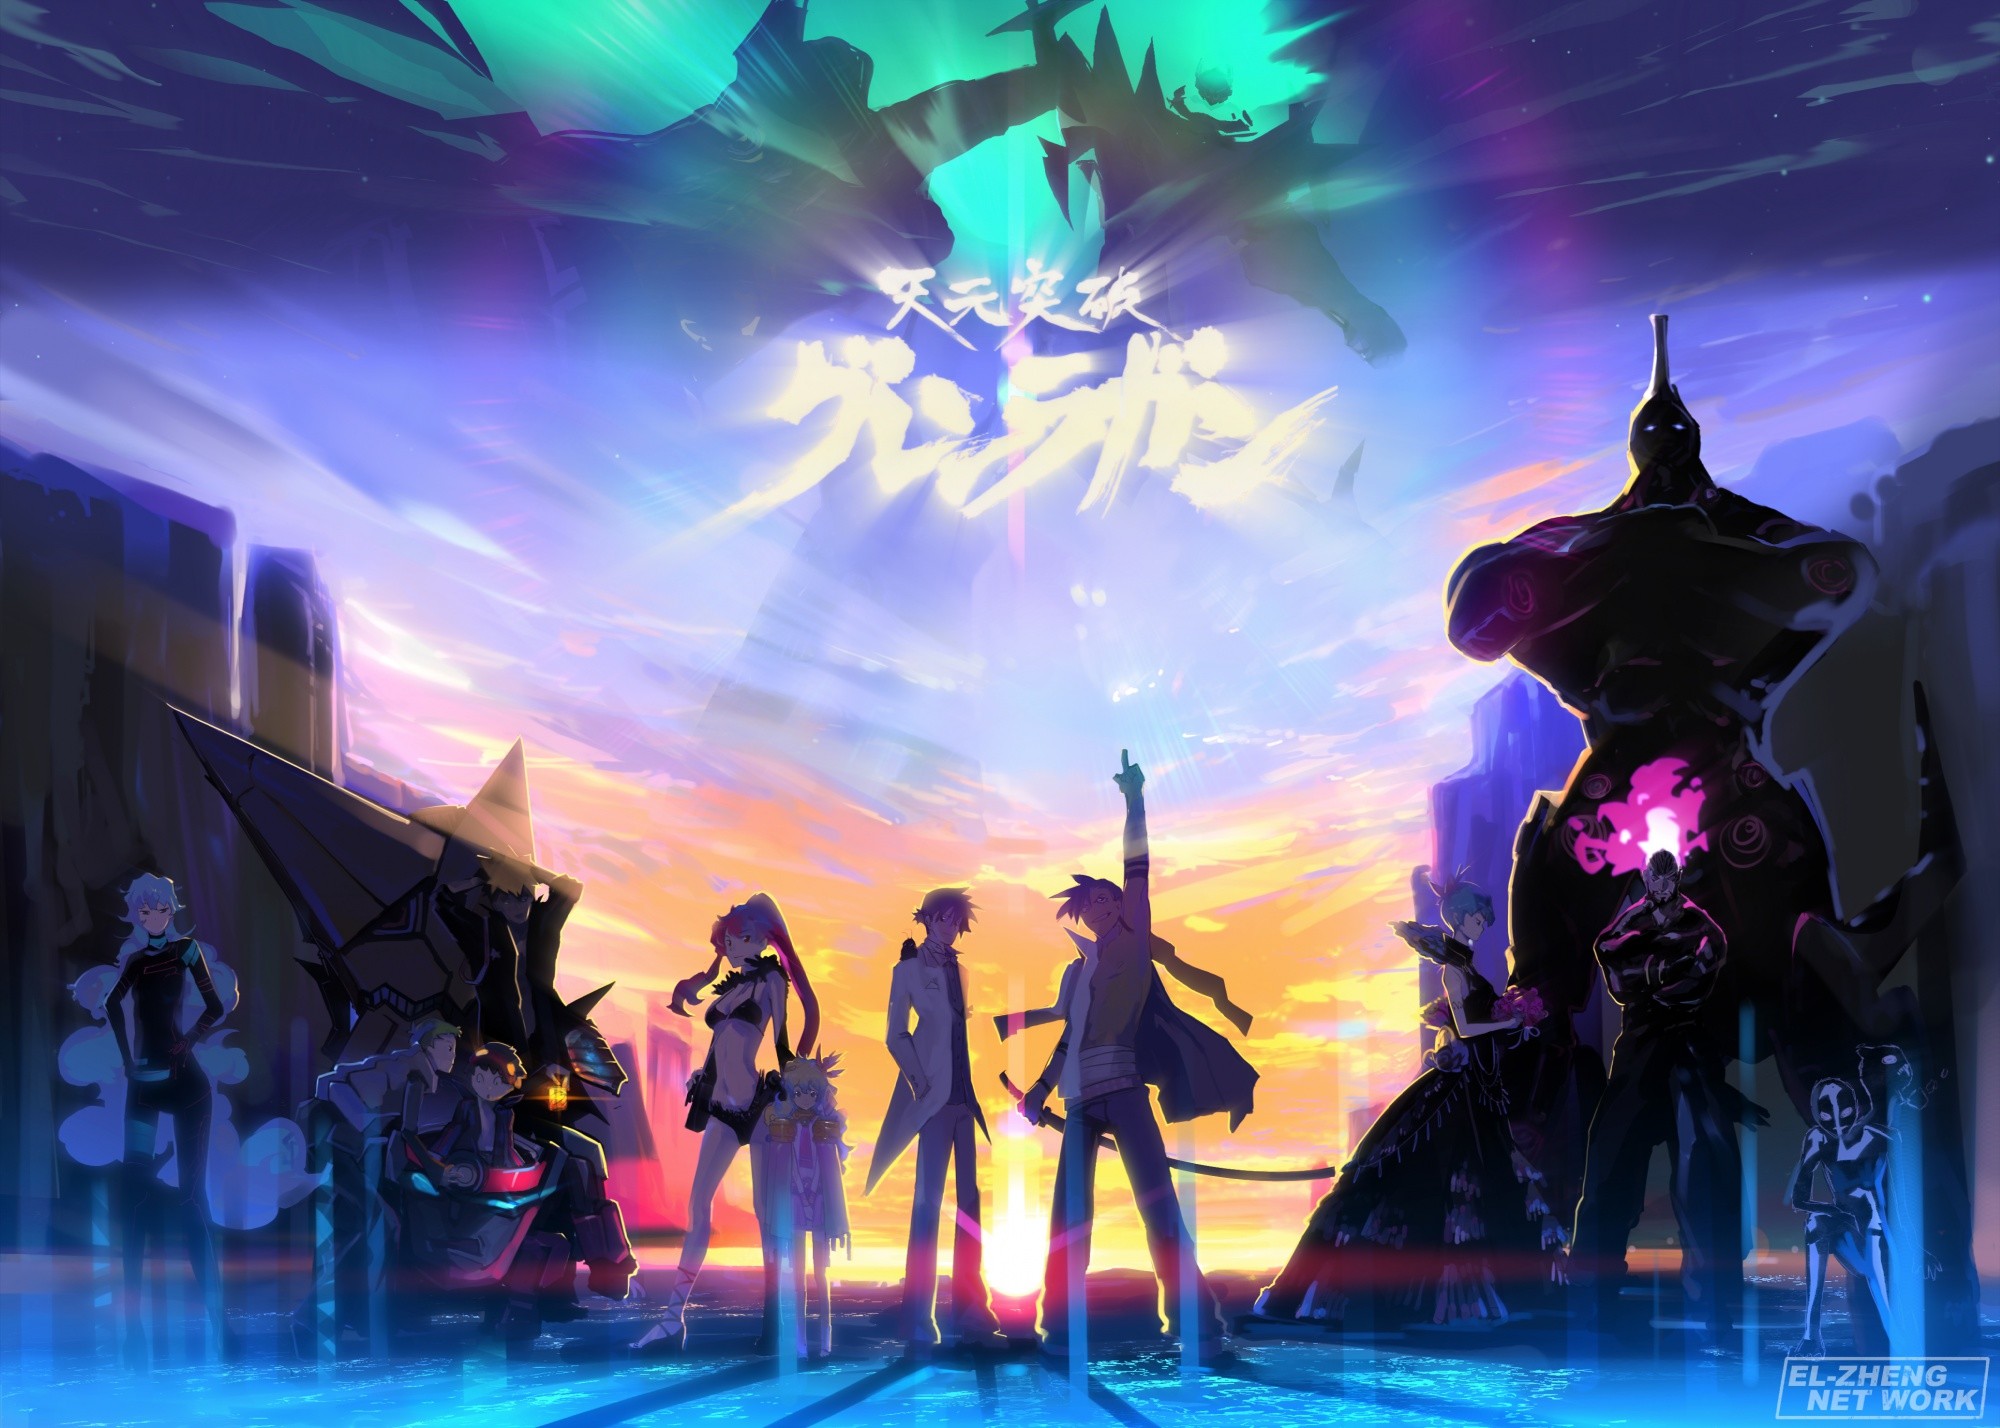 Tengen Toppa Gurren Lagann wallpapers and background images for desktop, iPhone, Android and any screen resolution